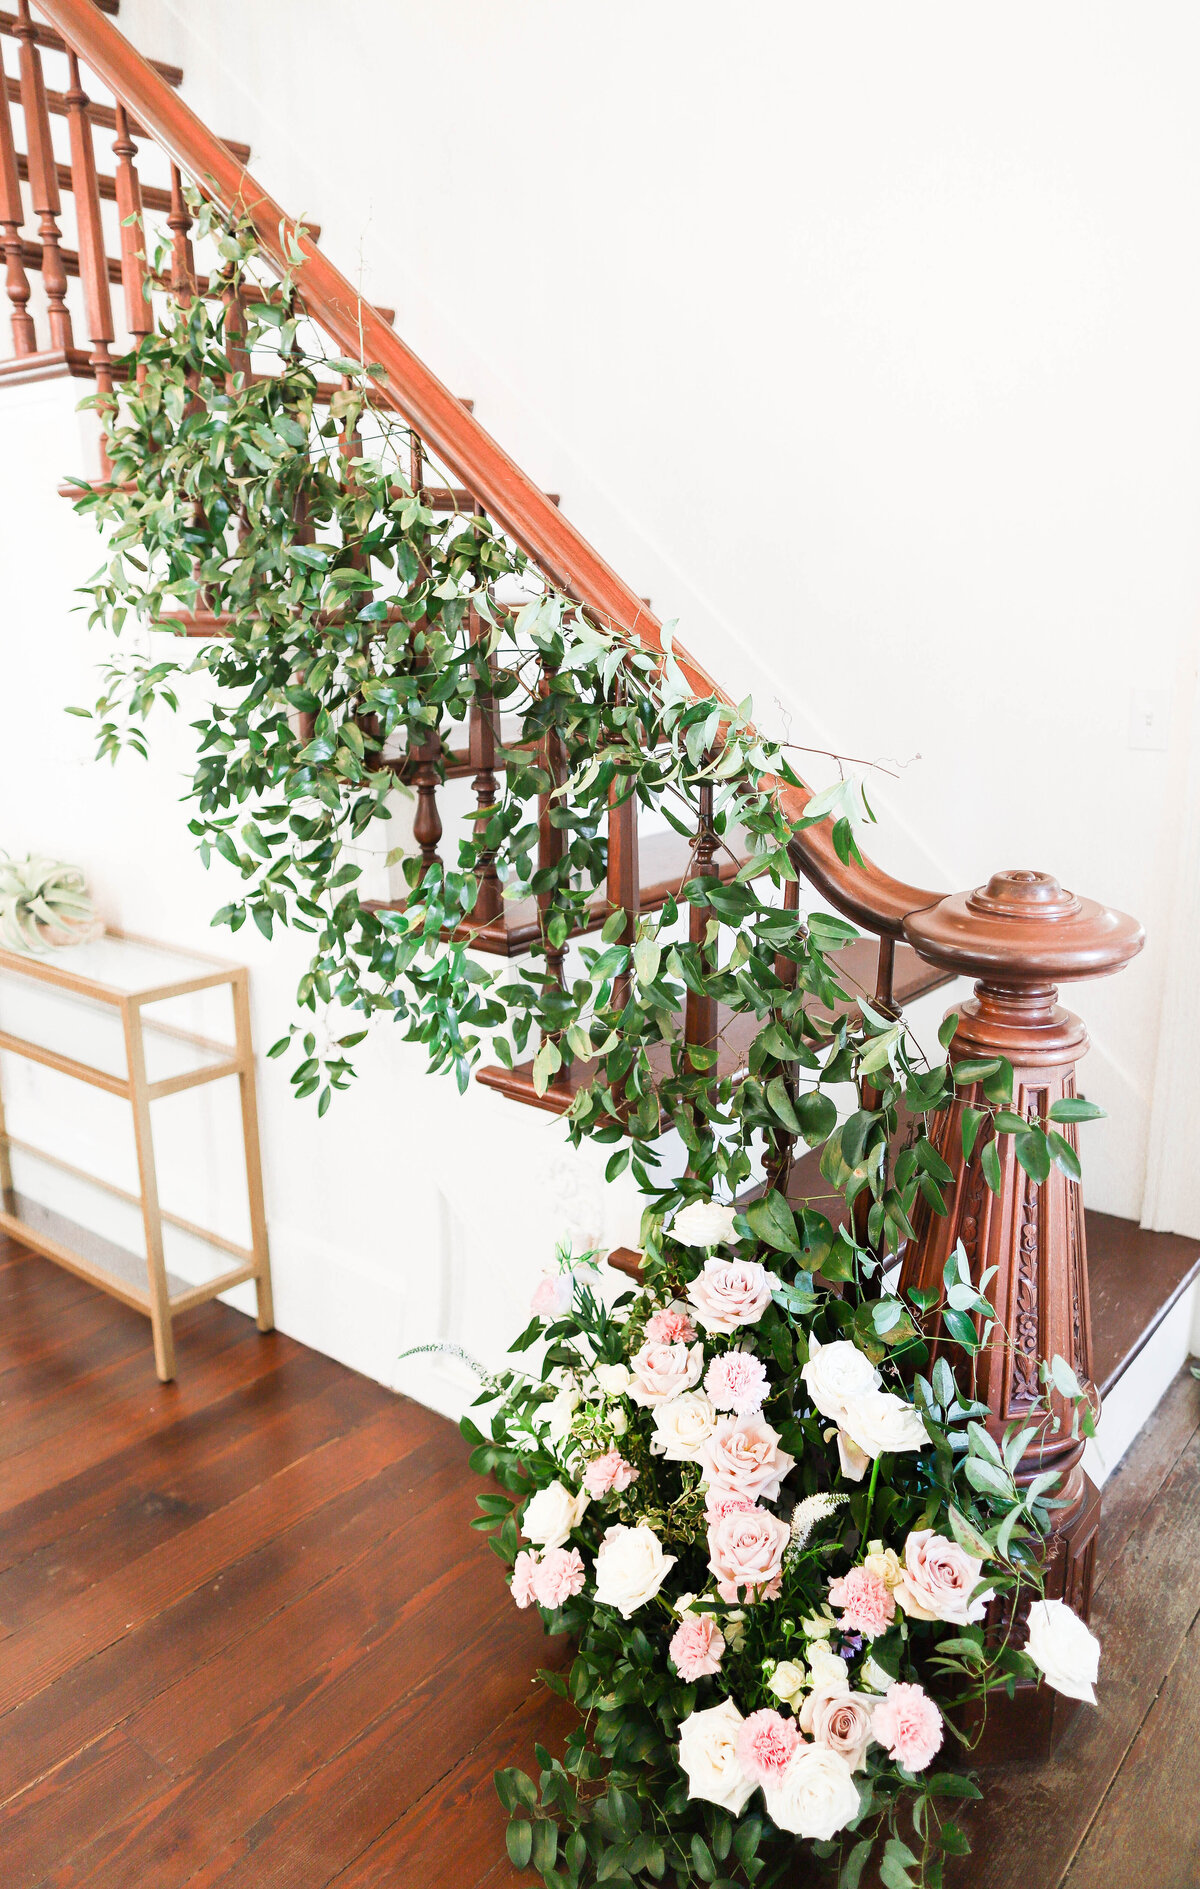 Floral design on stairs.